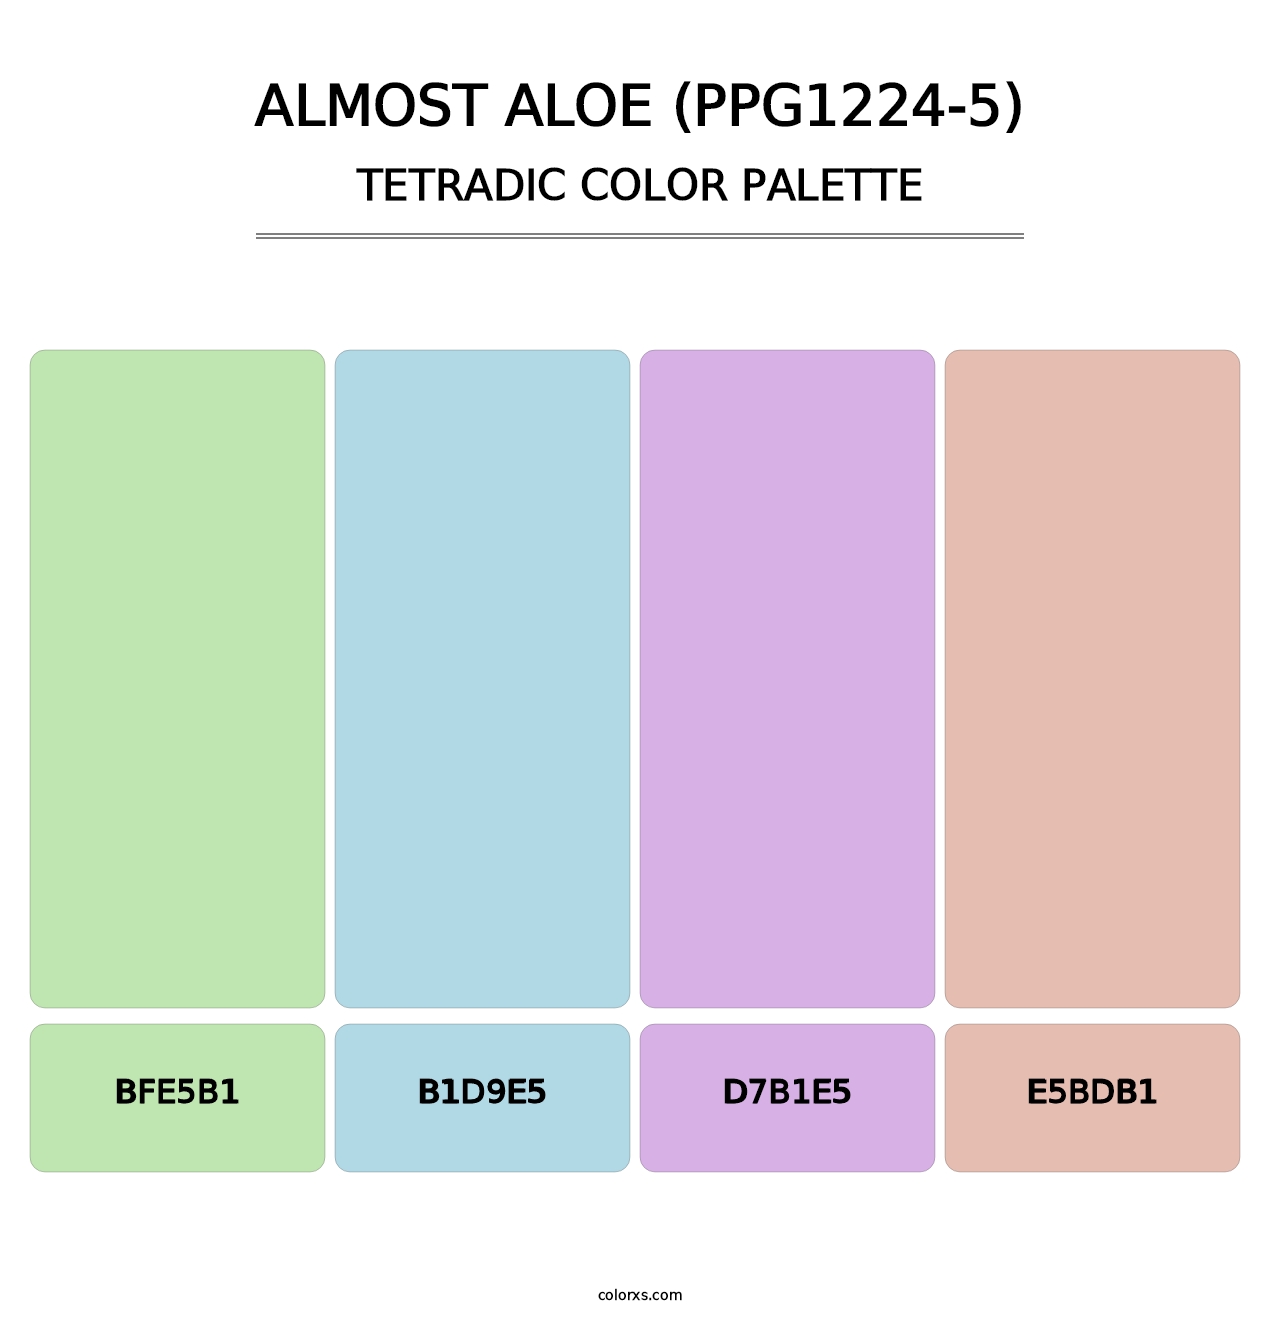 Almost Aloe (PPG1224-5) - Tetradic Color Palette